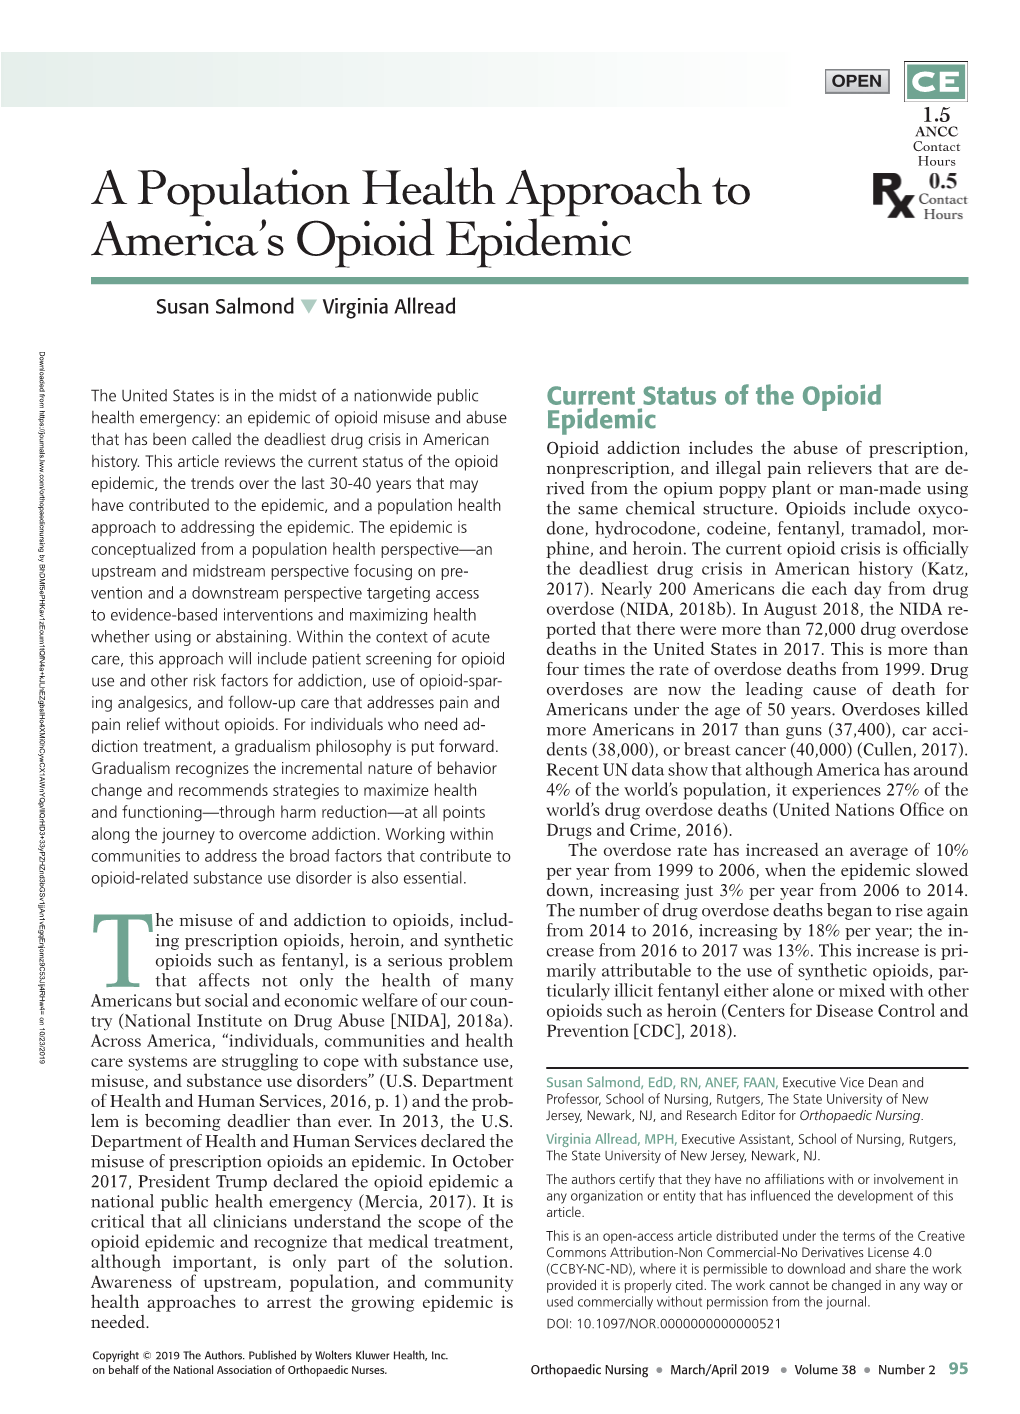 A Population Health Approach to America's Opioid Epidemic